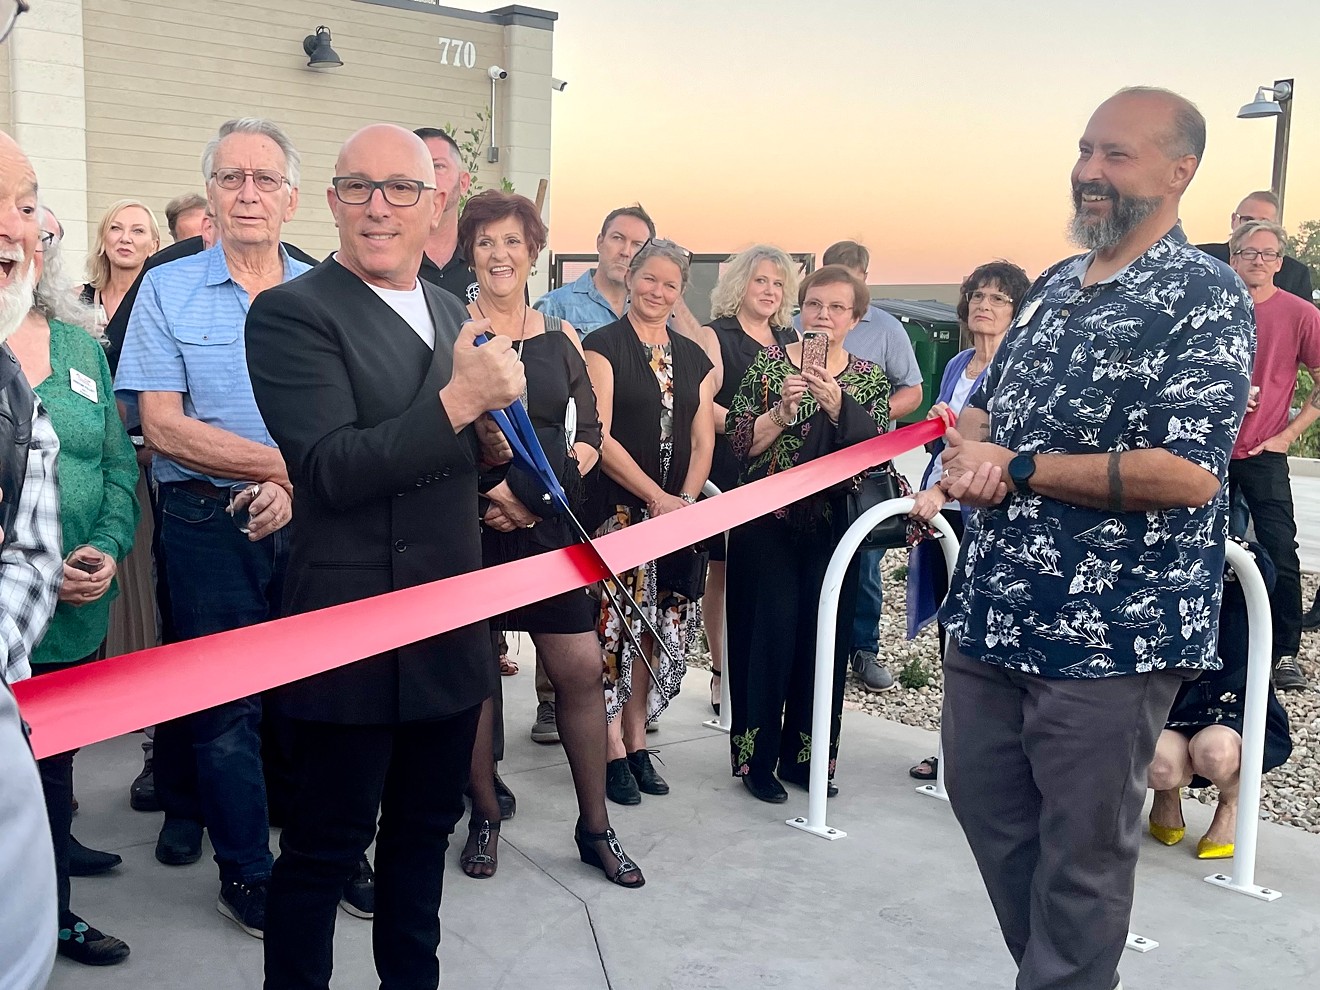 Maynard James Keenan cut the ribbon to officially open his new hilltop complex in Cottonwood.